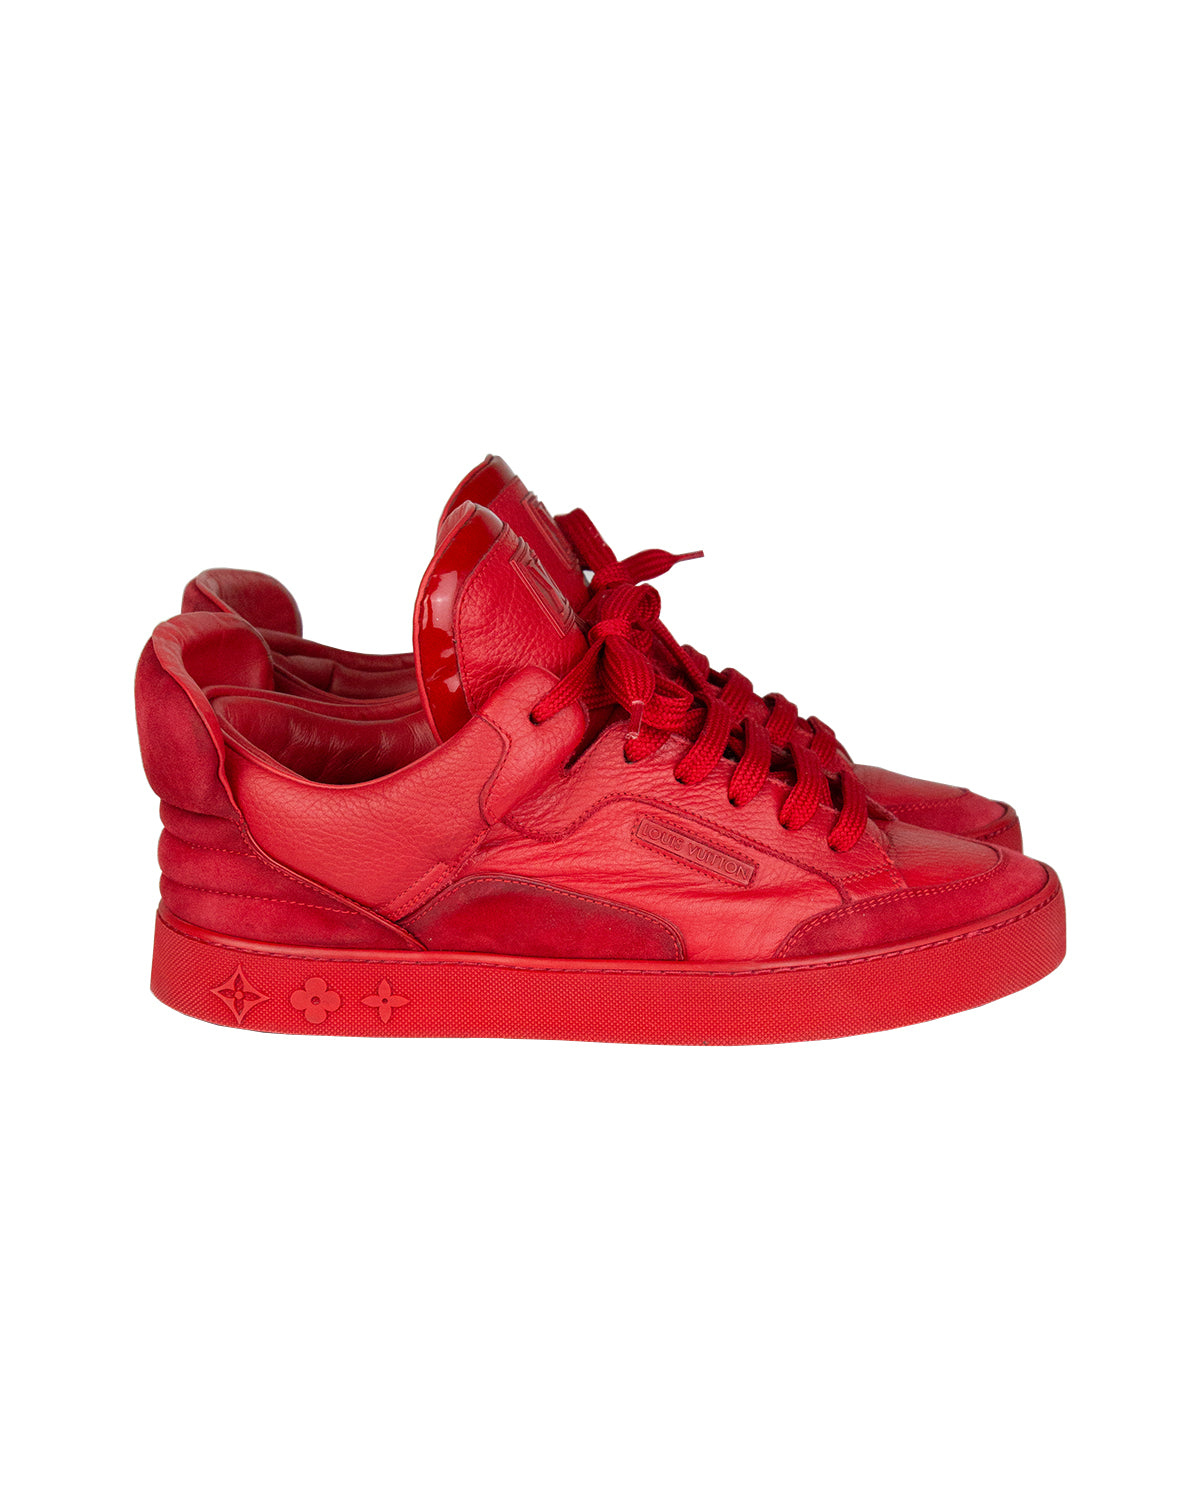 Louis Vuitton 2009 LV x Kanye West Don (Red)